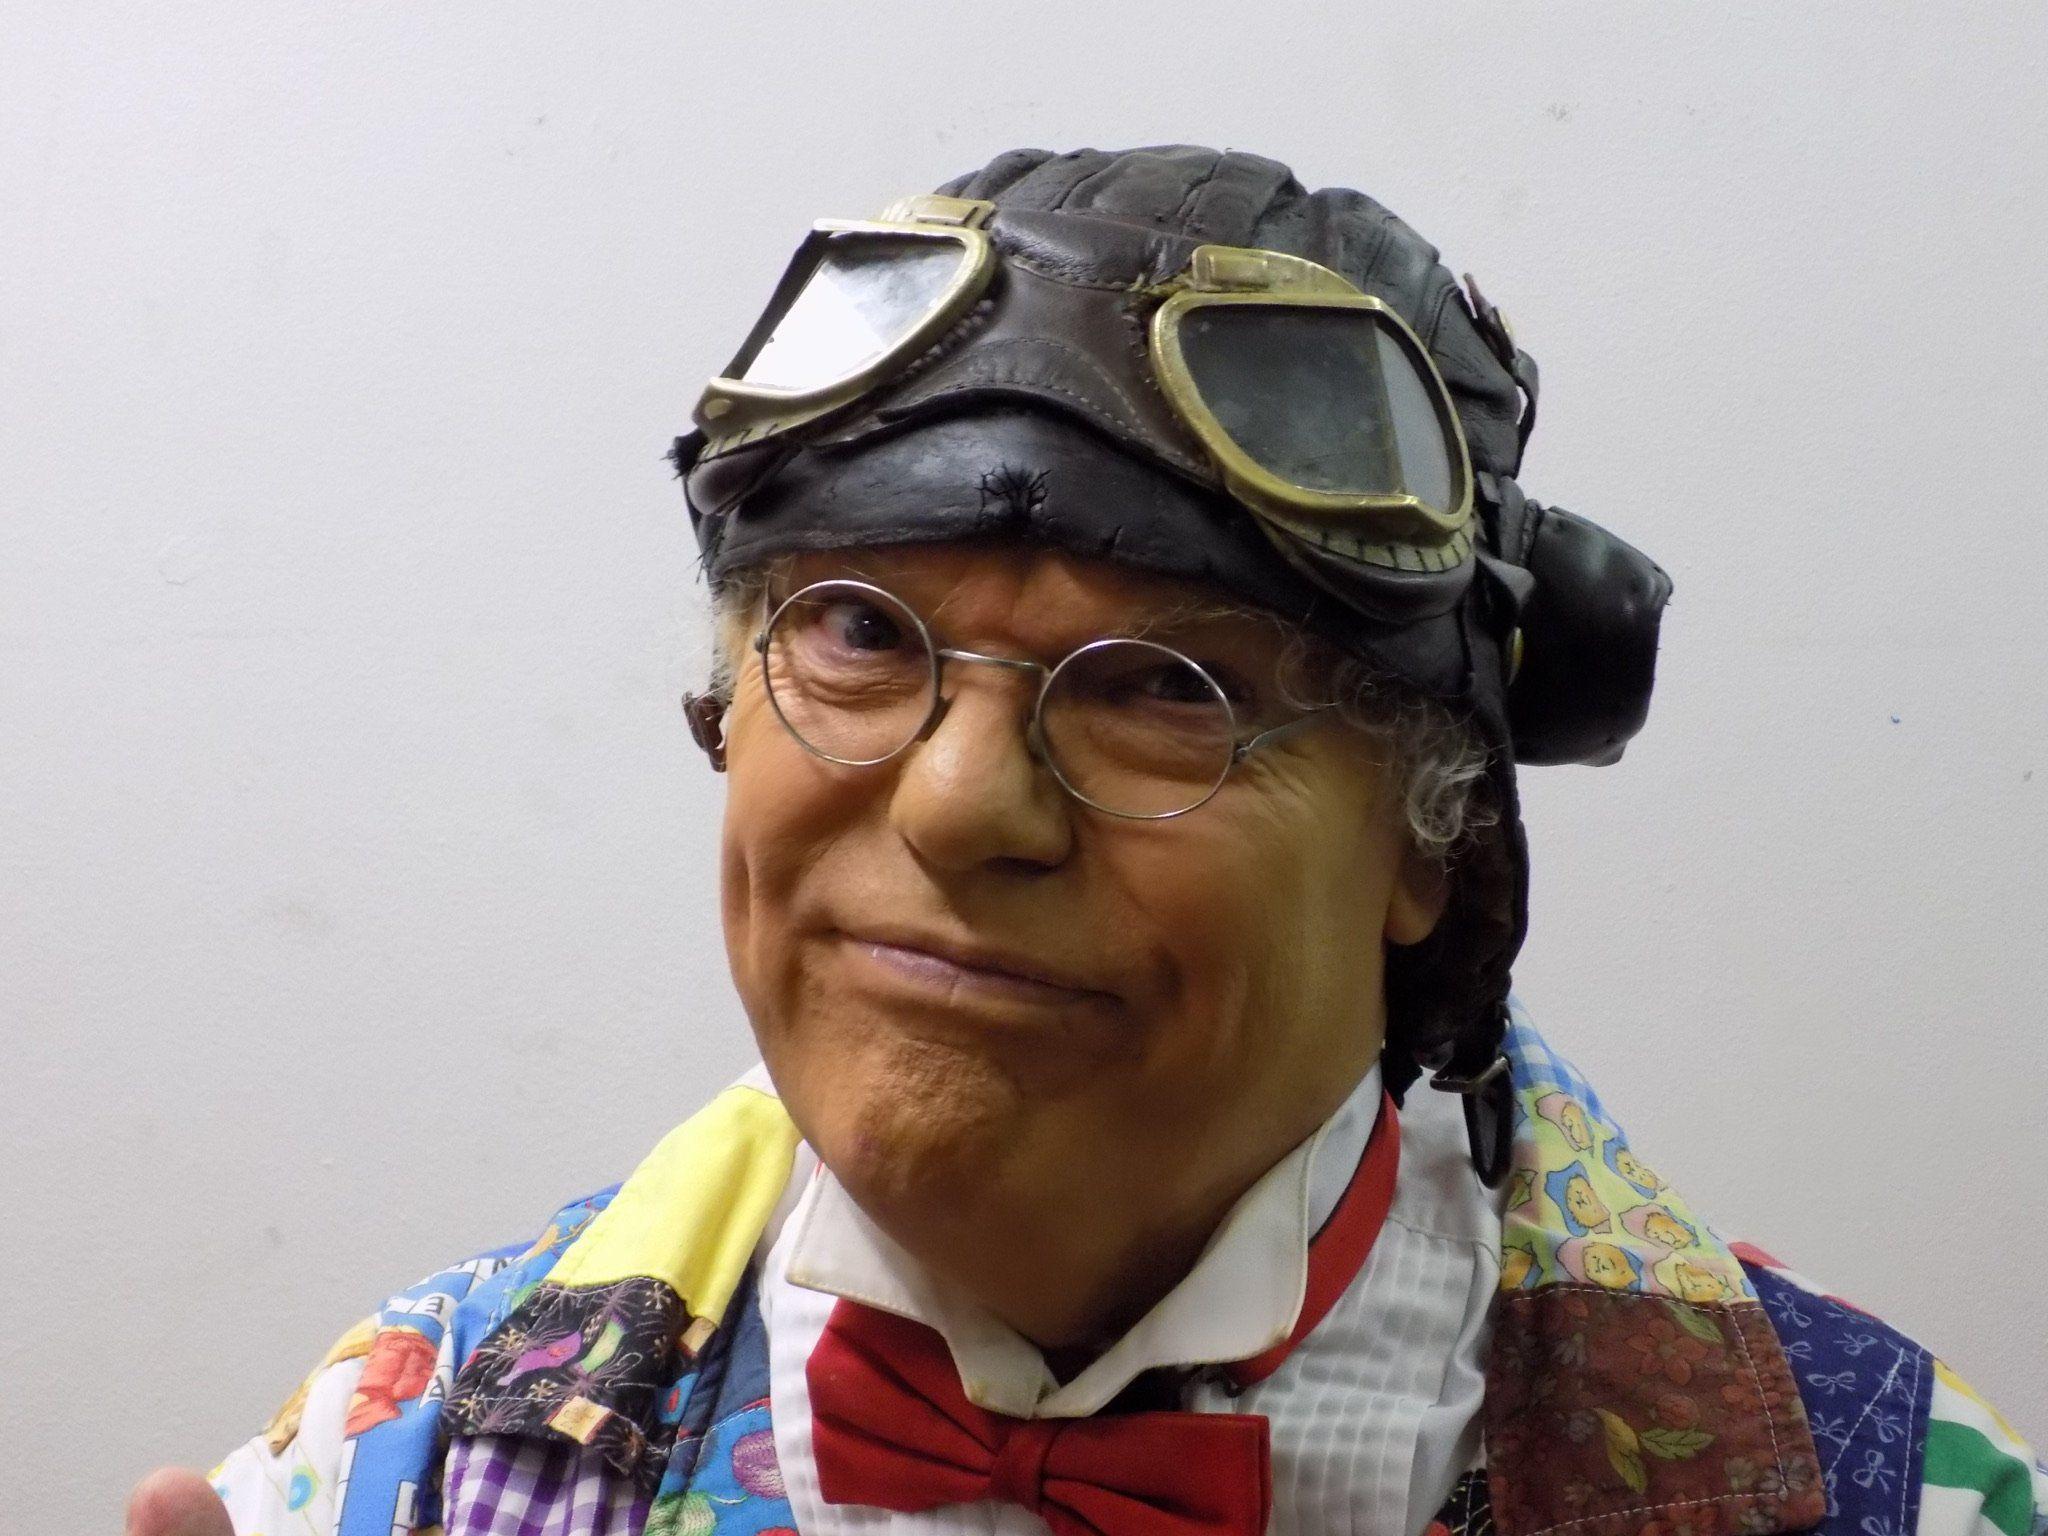 Roy chubby brown review